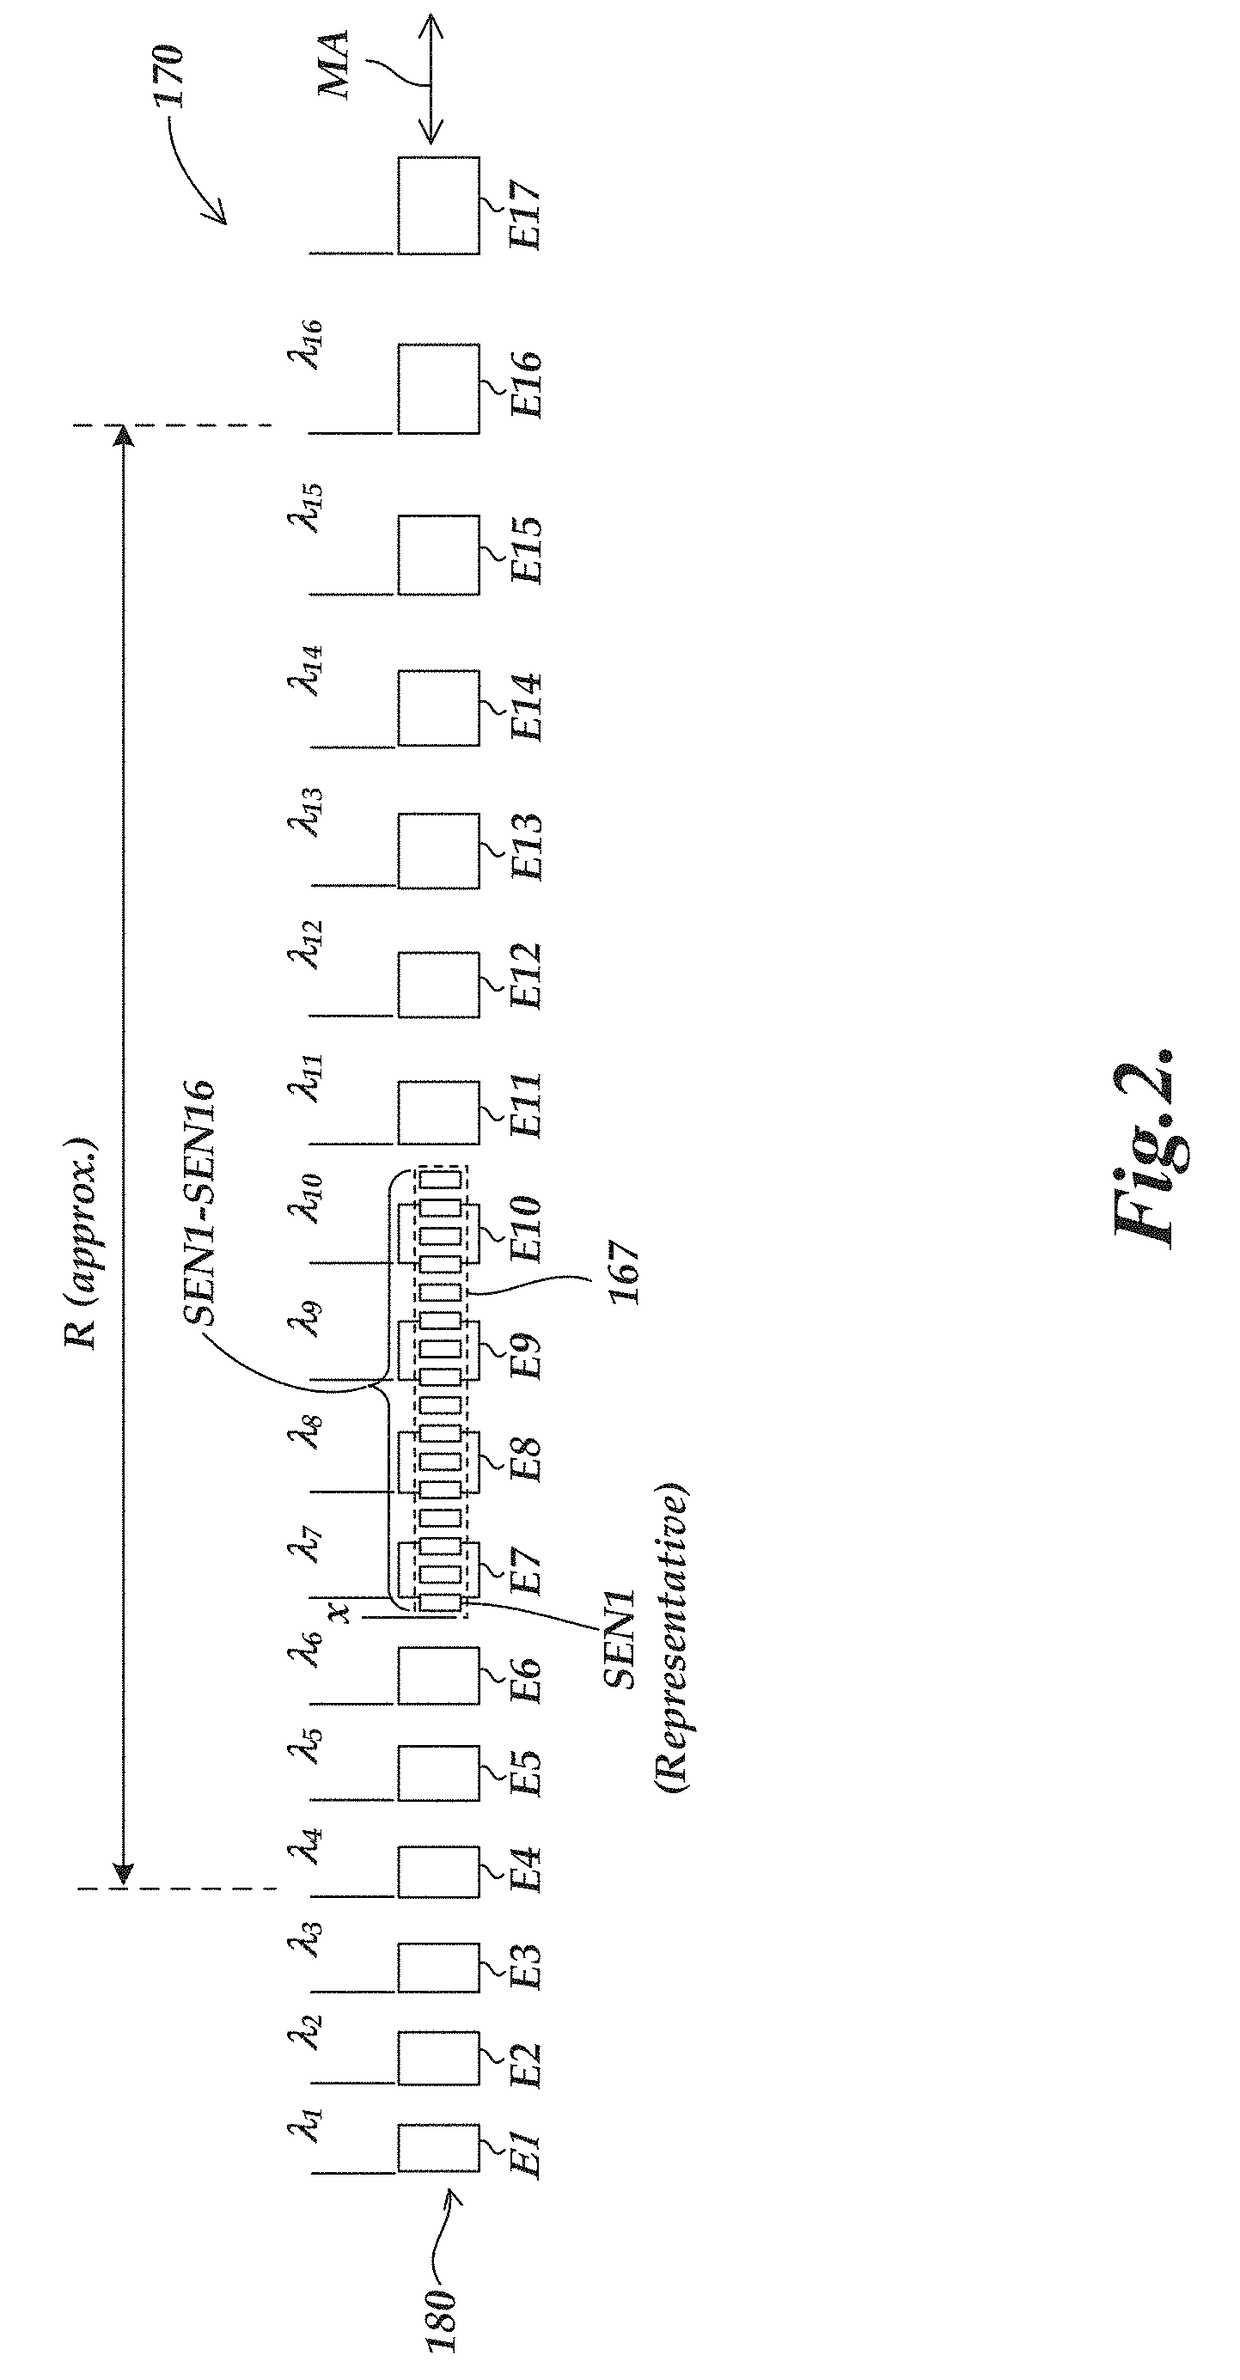 Absolute position encoder including scale with varying spatial characteristic and utilizing fourier transform or other signal processing